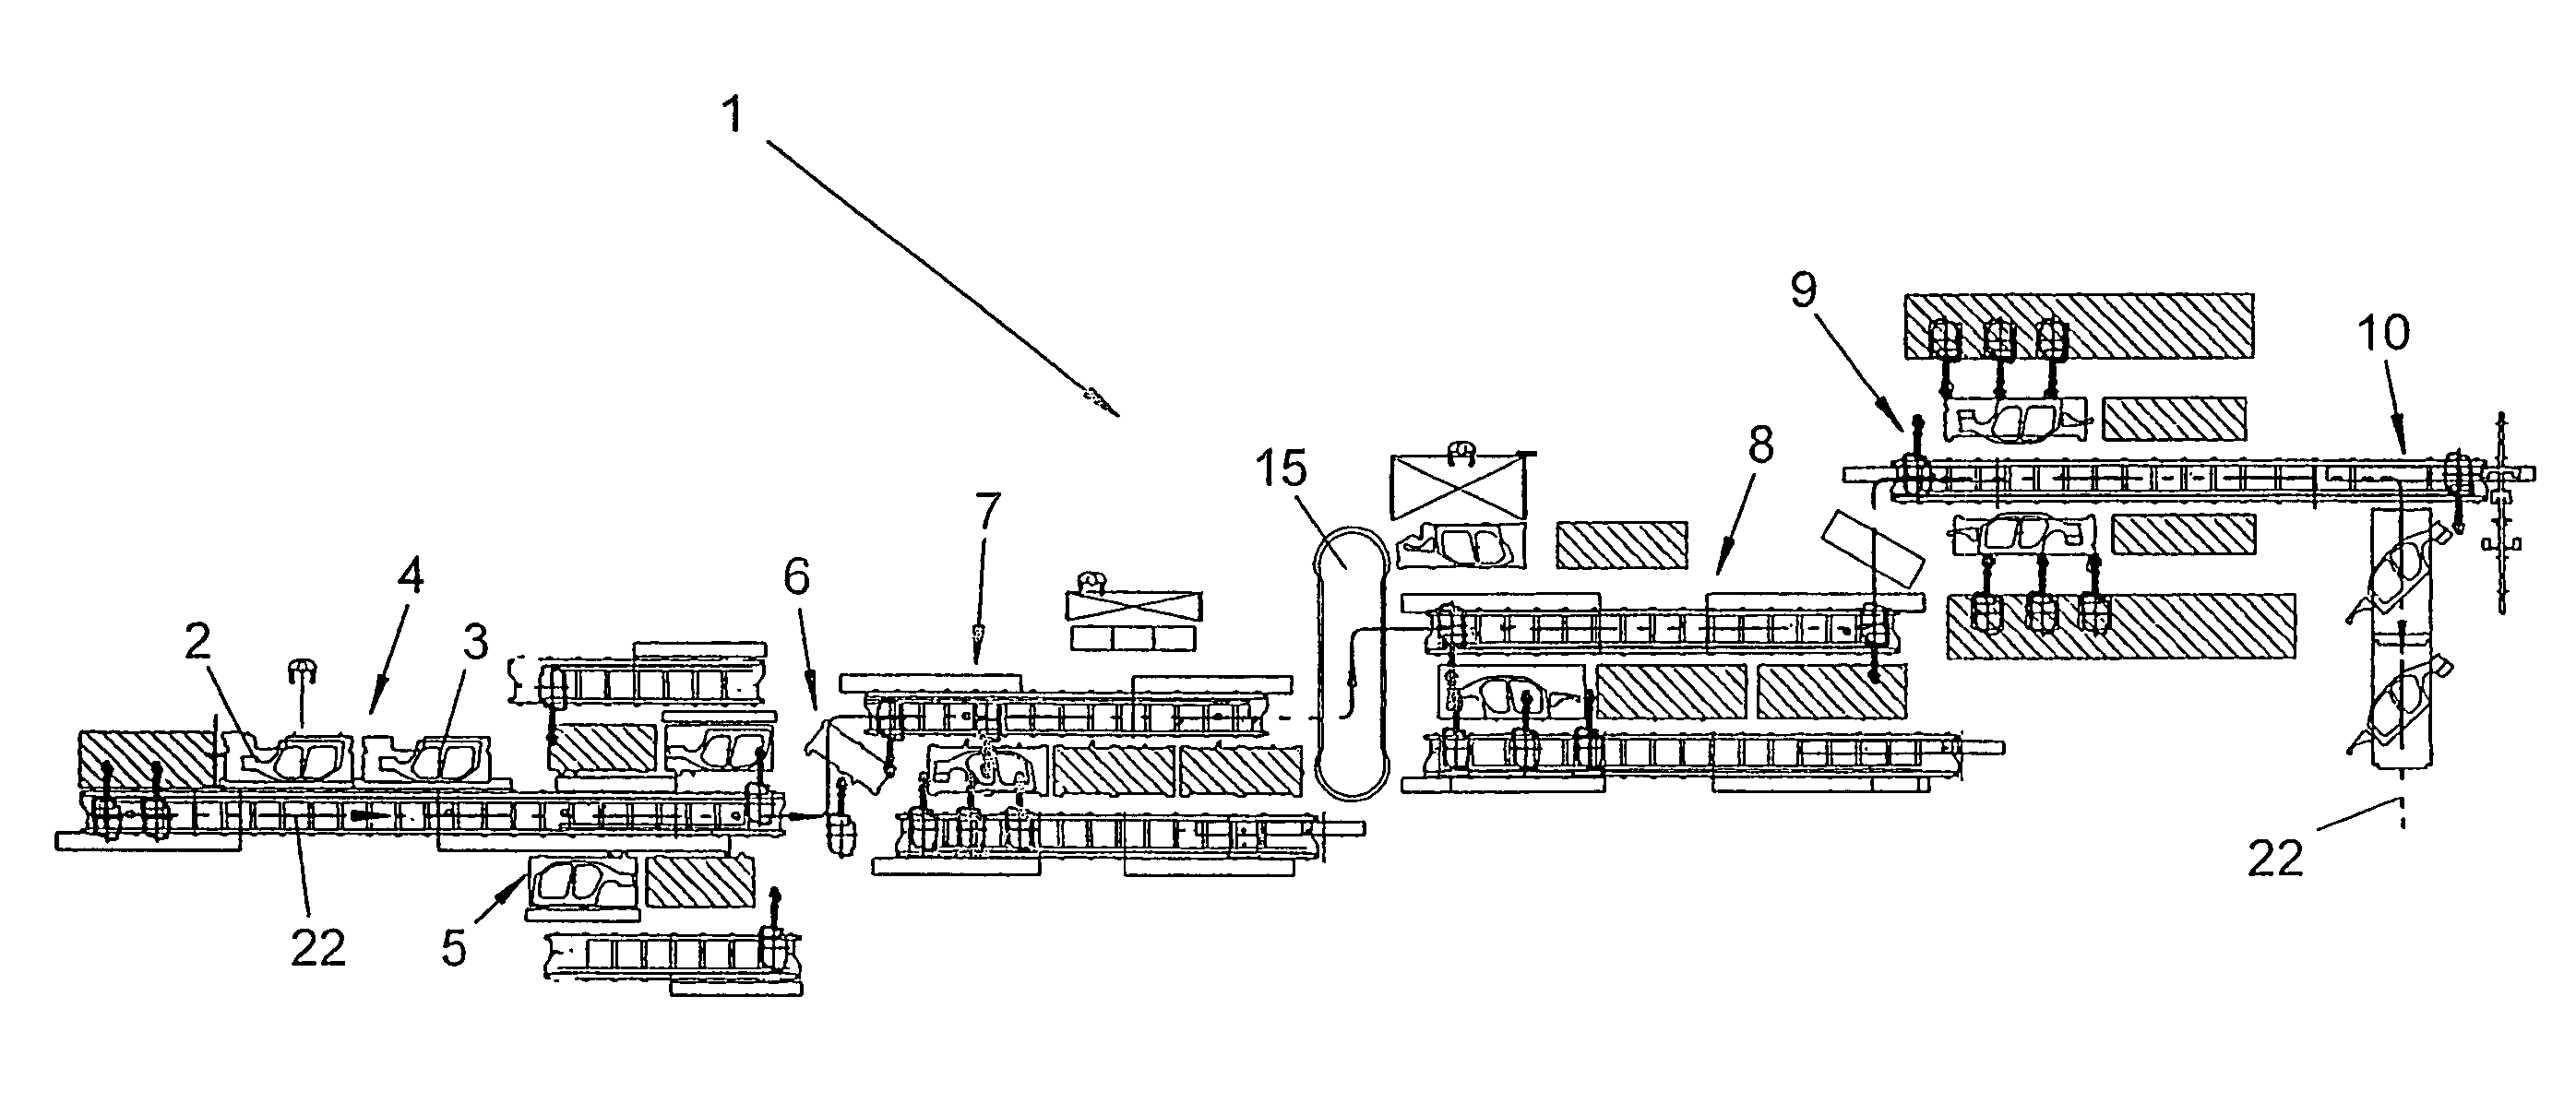 Manufacturing plant for parts, particularly vehicle body parts